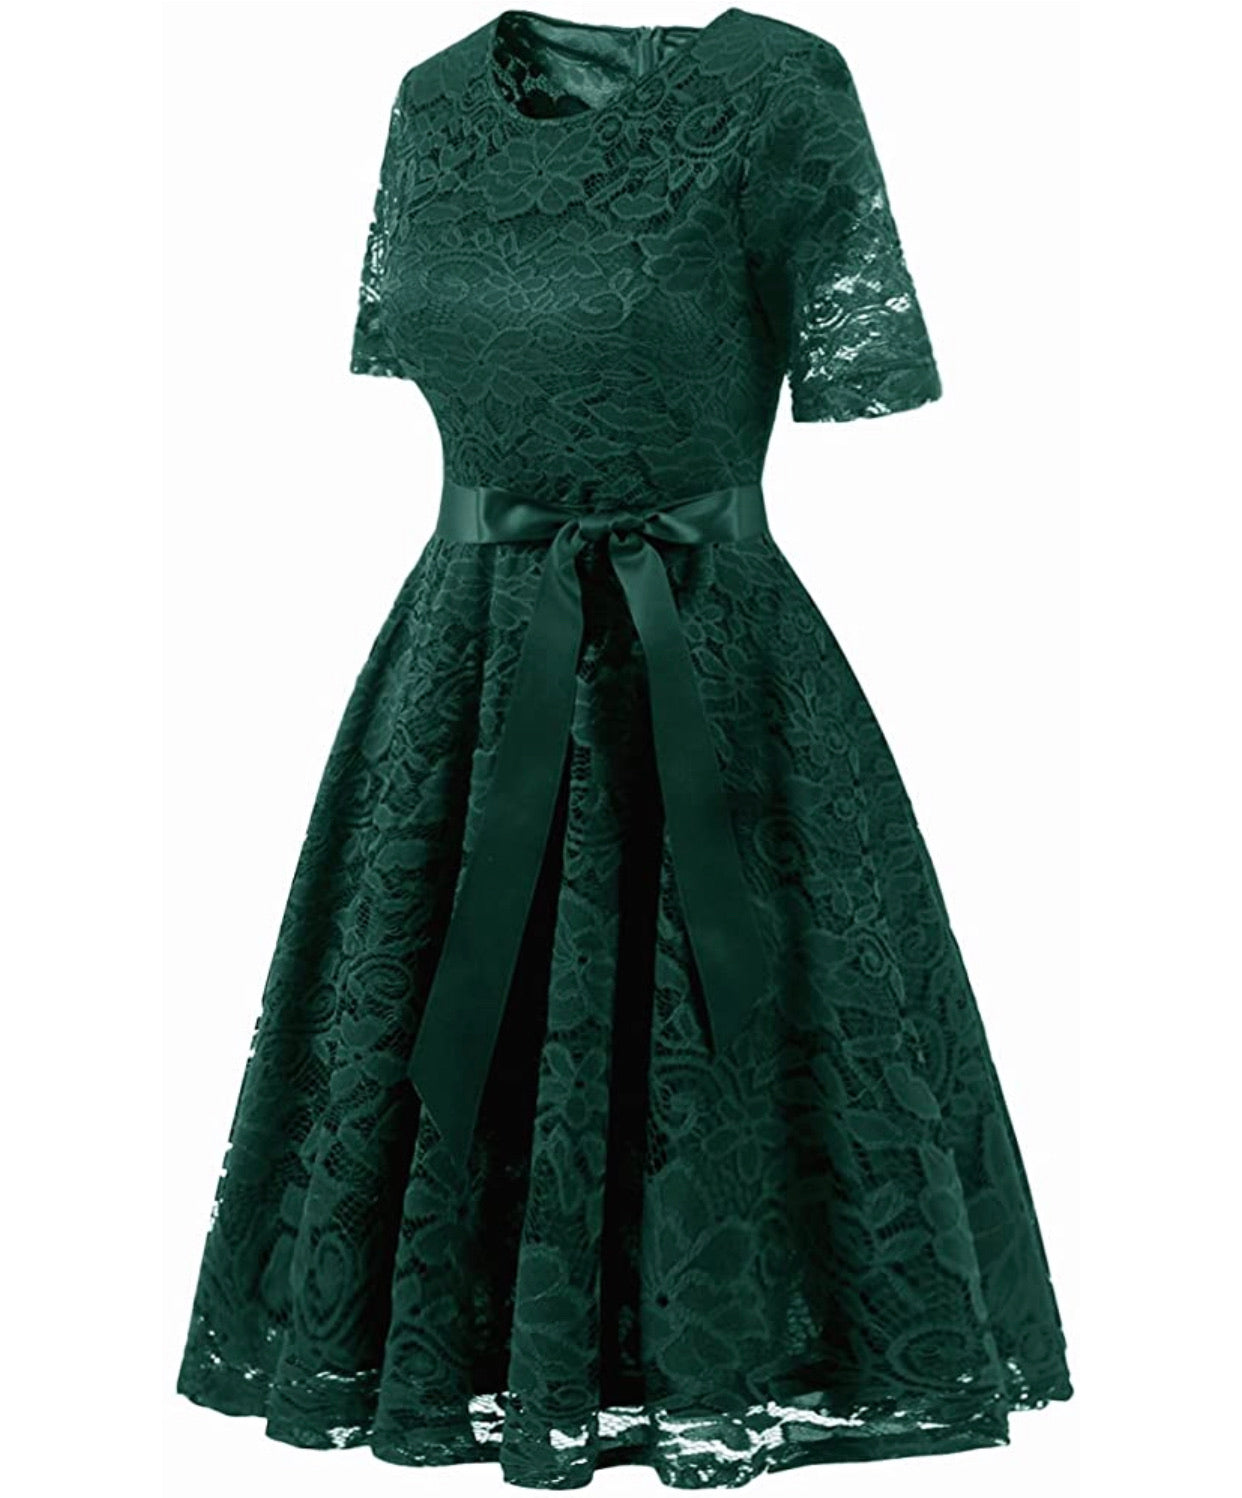 Vintage Inspired Full Lace Cocktail Dress, Sizes Small - 3XLarge (Green)